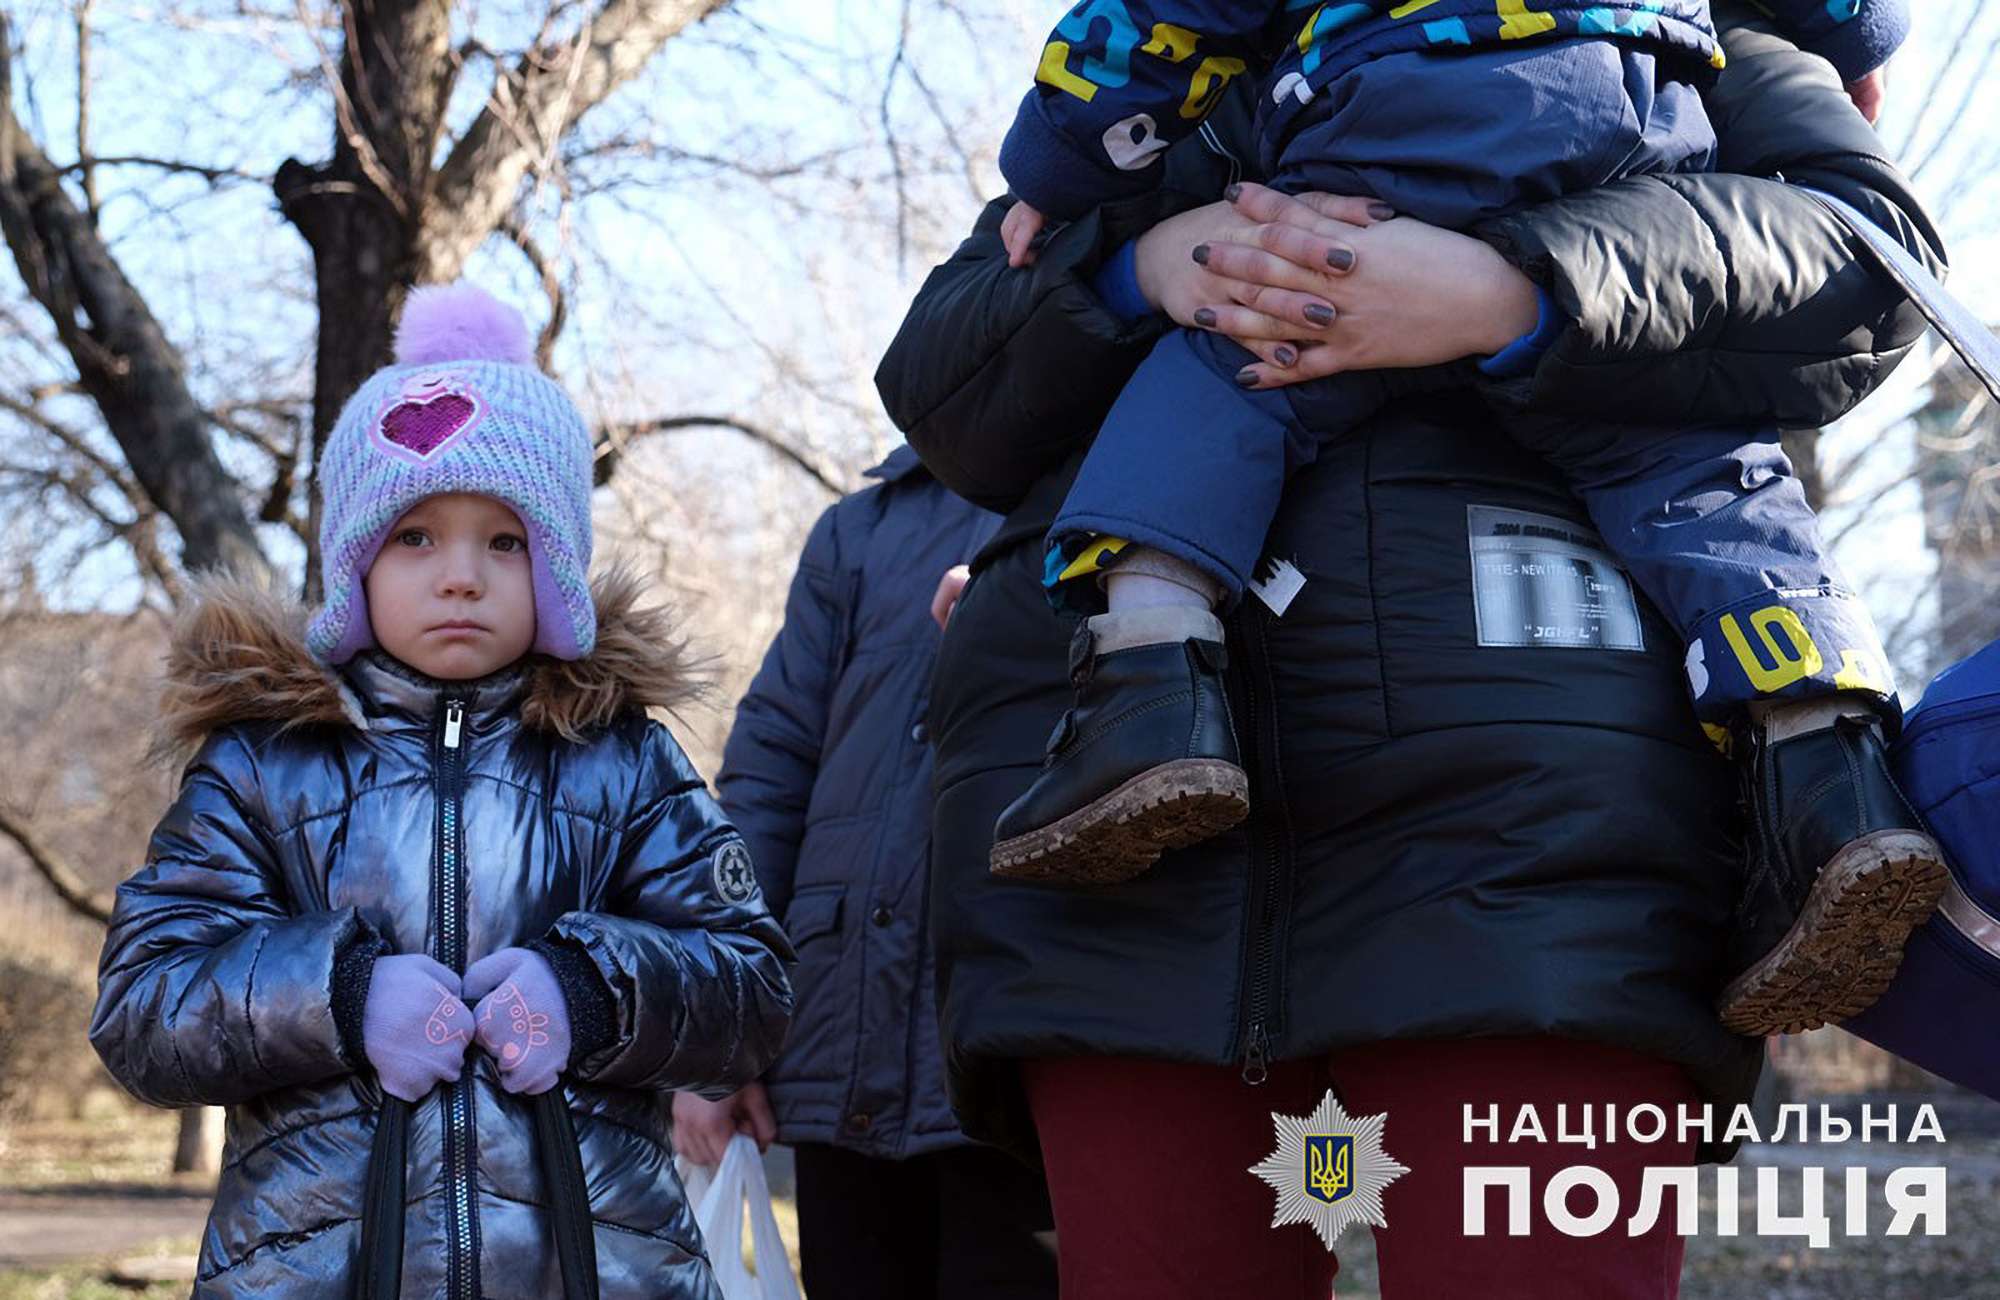 Read more about the article Police Rescue Family With 3 Young Children From Russian Shelling In New York